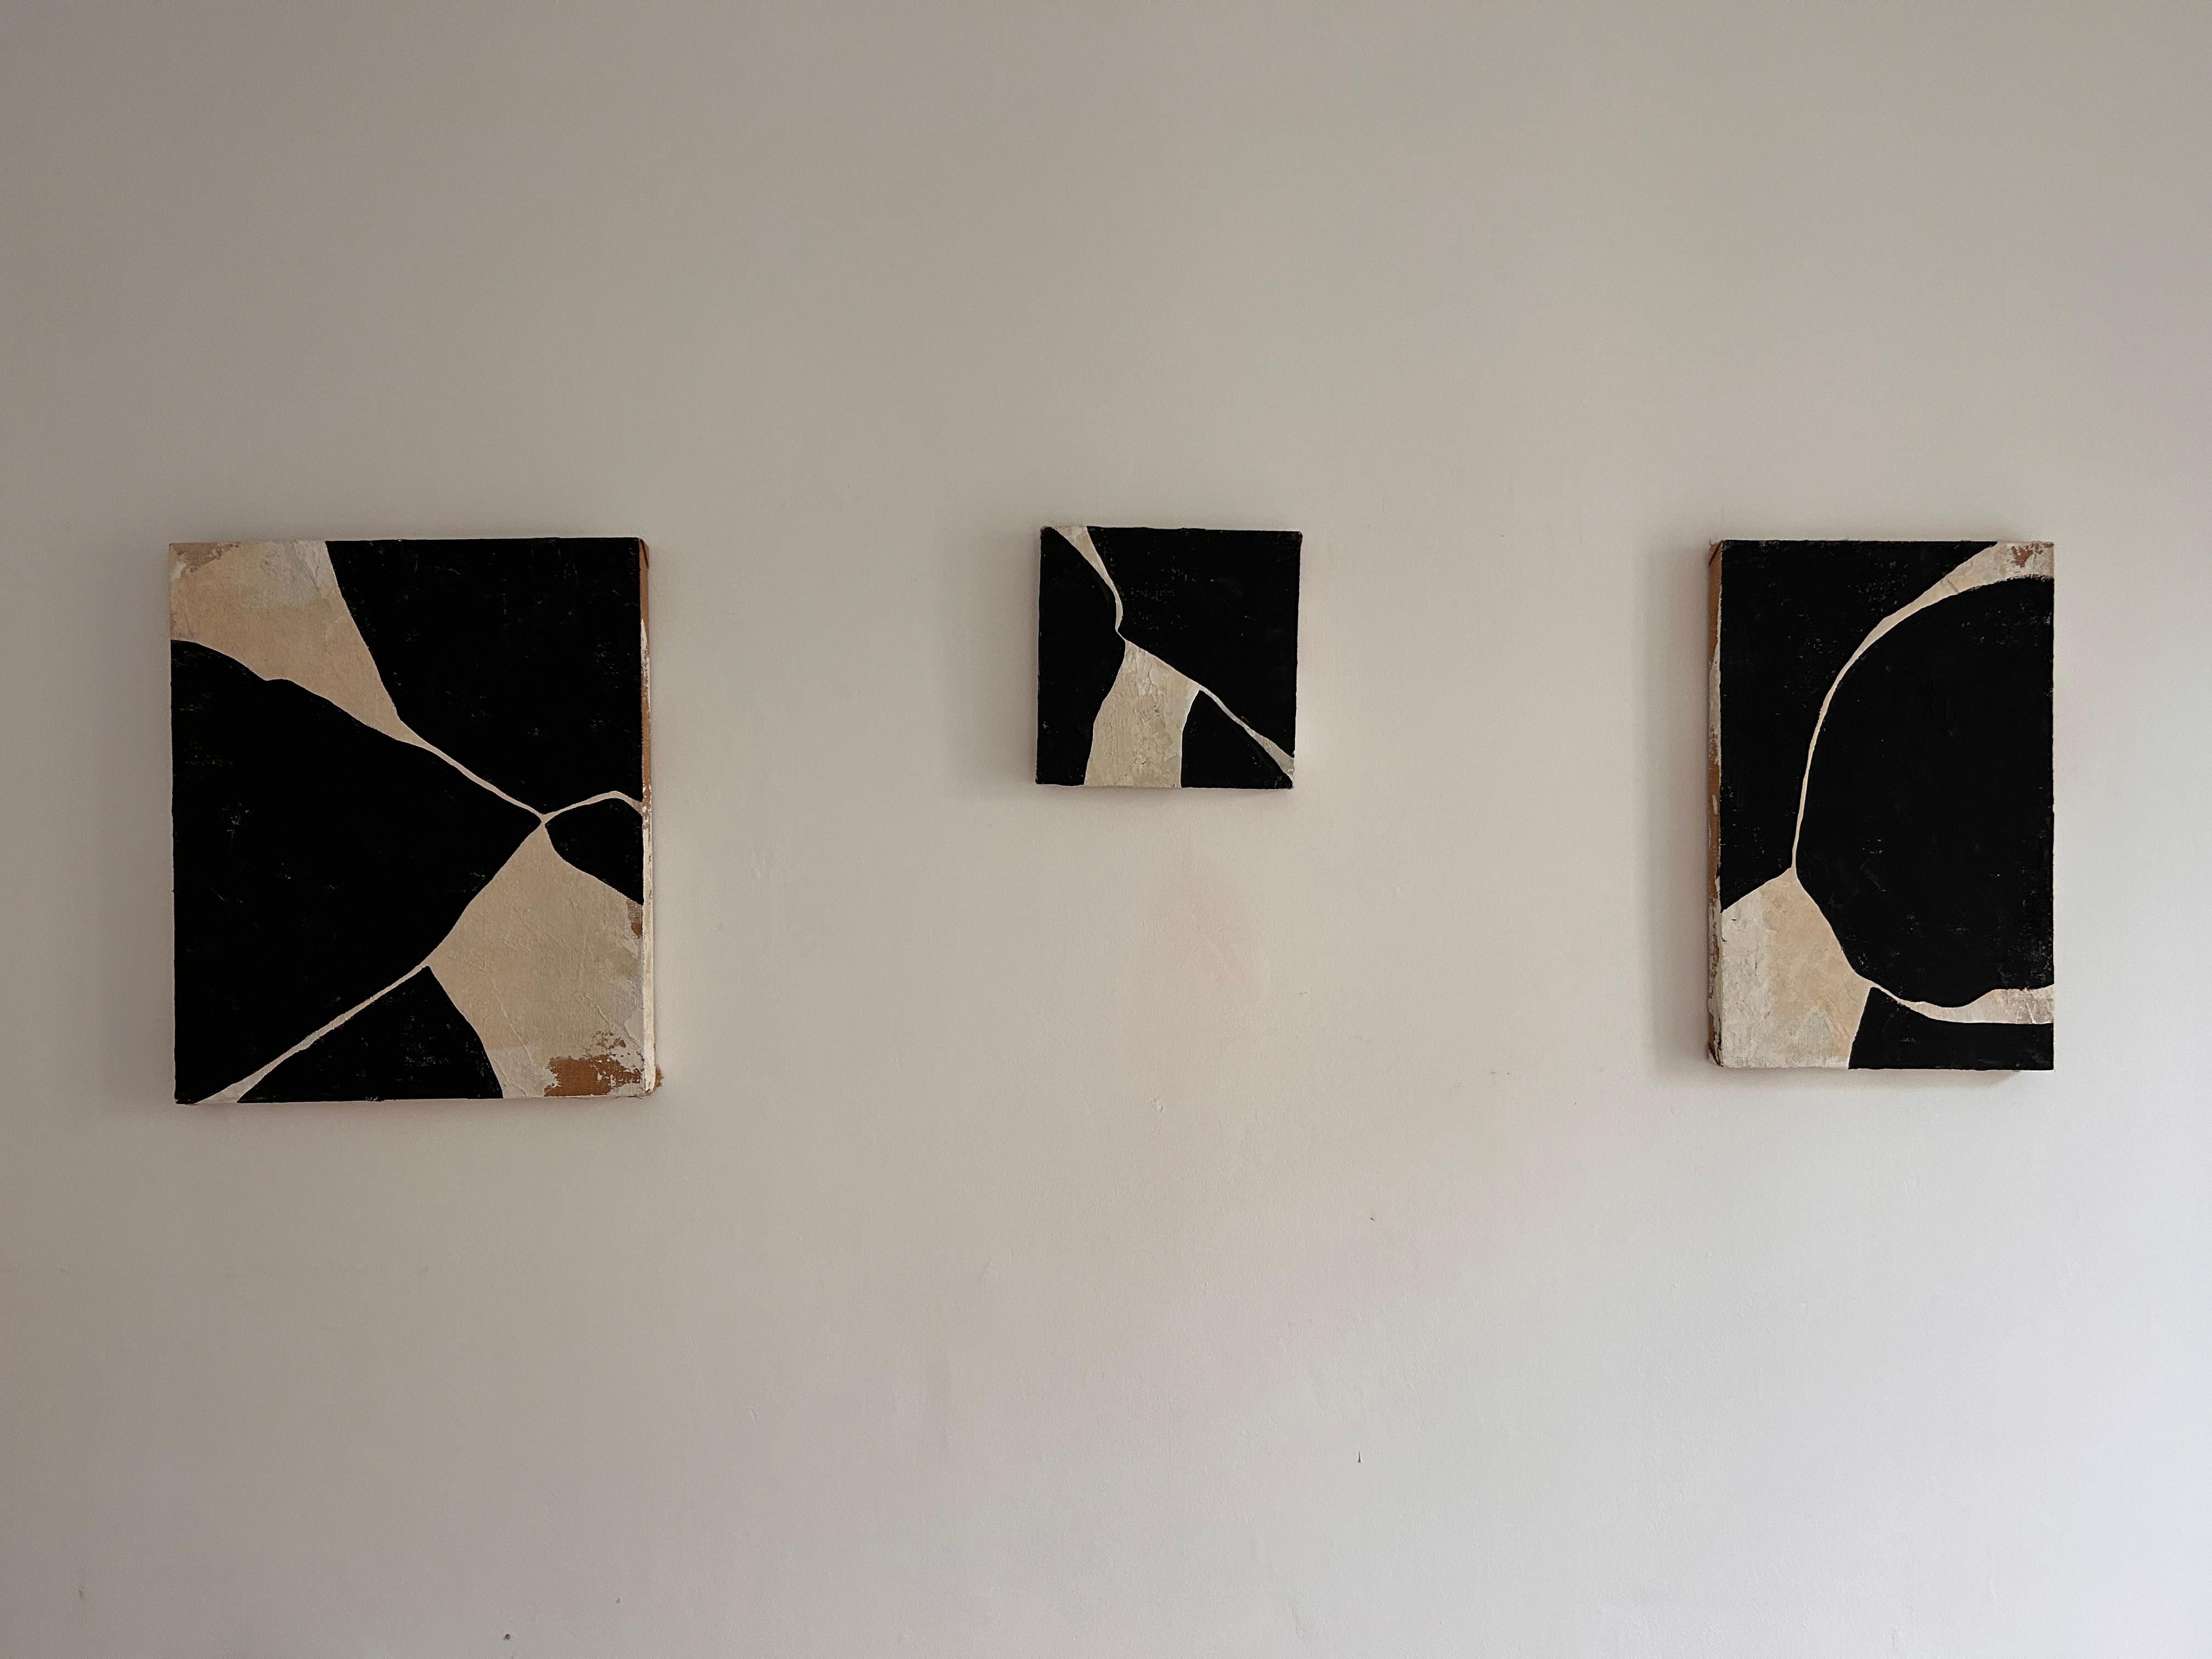 Triptych artowrk by contemporary artist Alicia Gimeno. The size is of the three pieces. 

65x54 cm
30x30 cm
61x38 cm

Alicia Gimeno, born in Barcelona (1989), trained in graphic design during her time in Mexico. From the beginning, she was